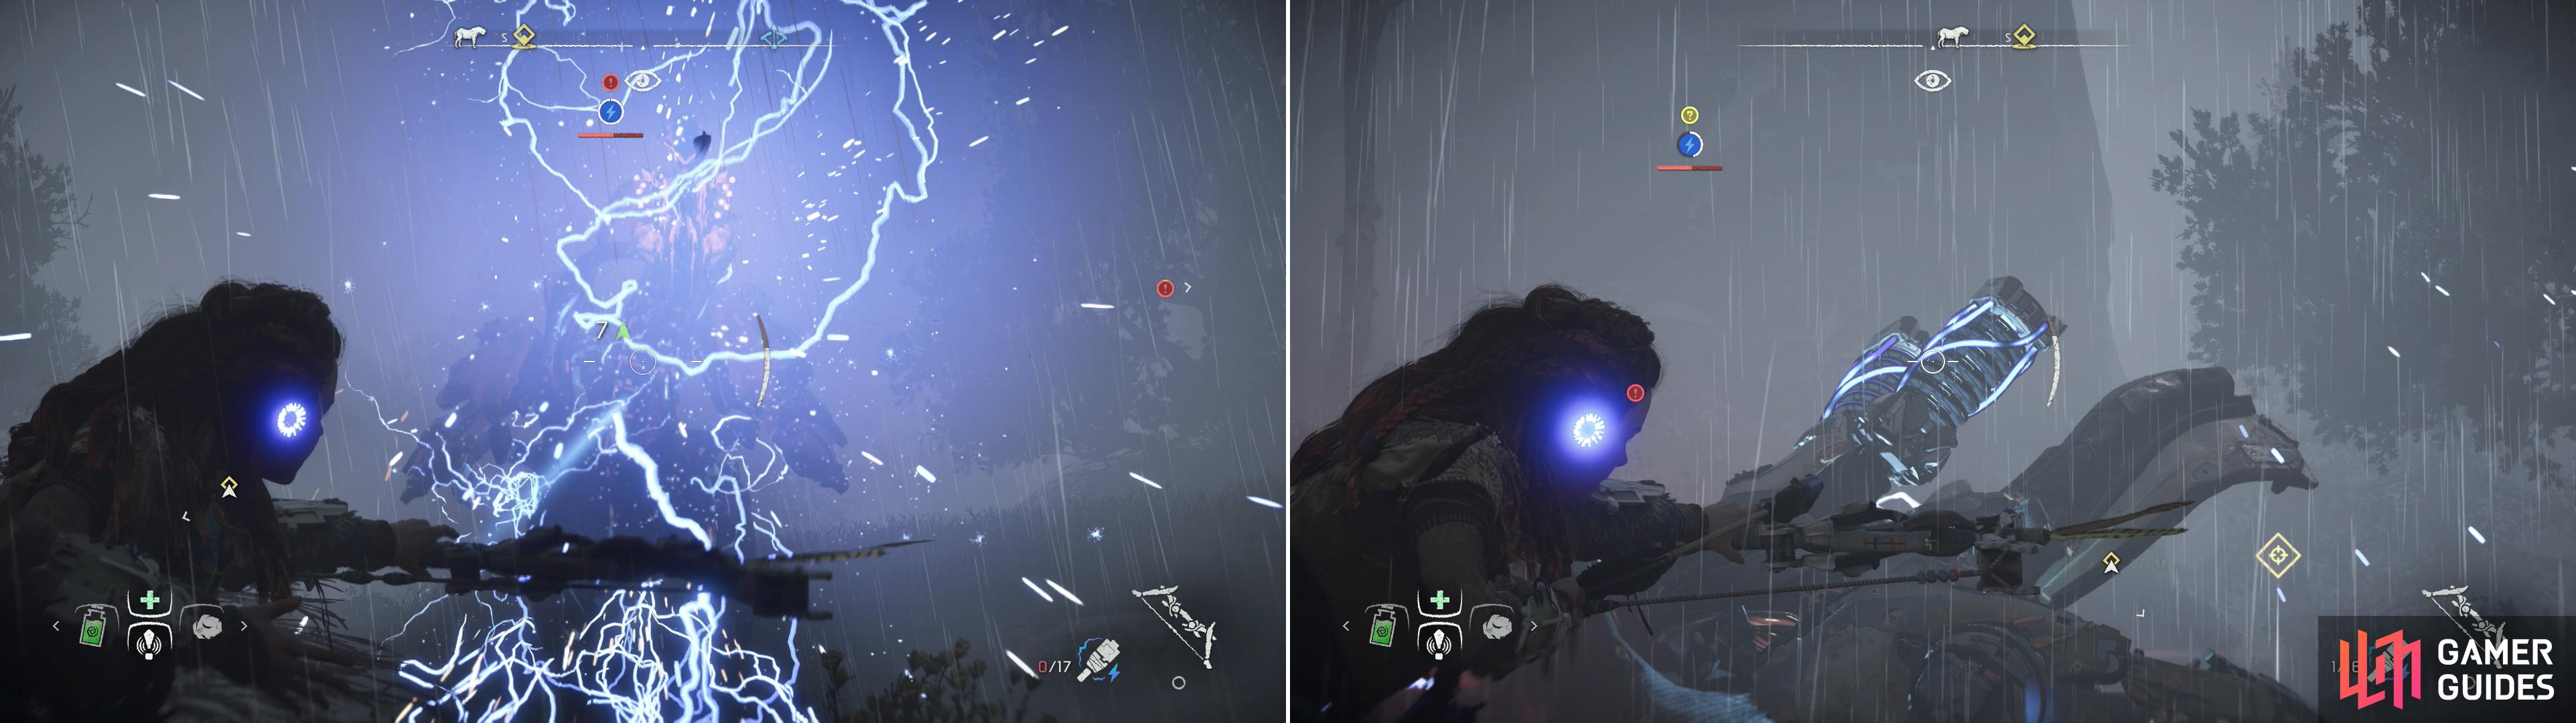 Your War Bow comes in very handy against the Longleg, as you can use Shock Arrows to stun the machine (left) and subsequently target its Power Cells (right).